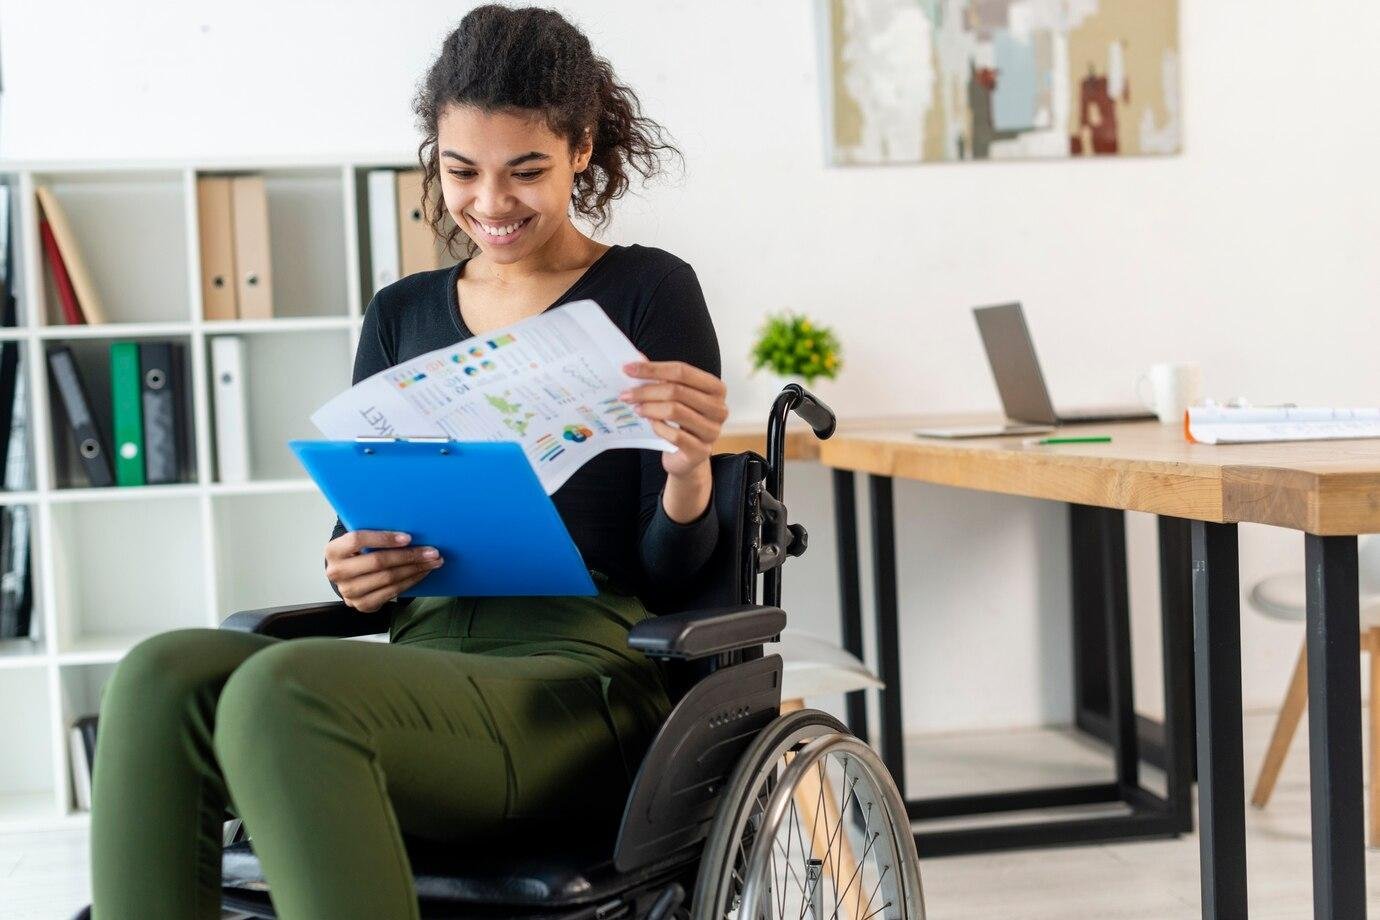 8 Questions to Discuss with Your VA Disability Claim At...